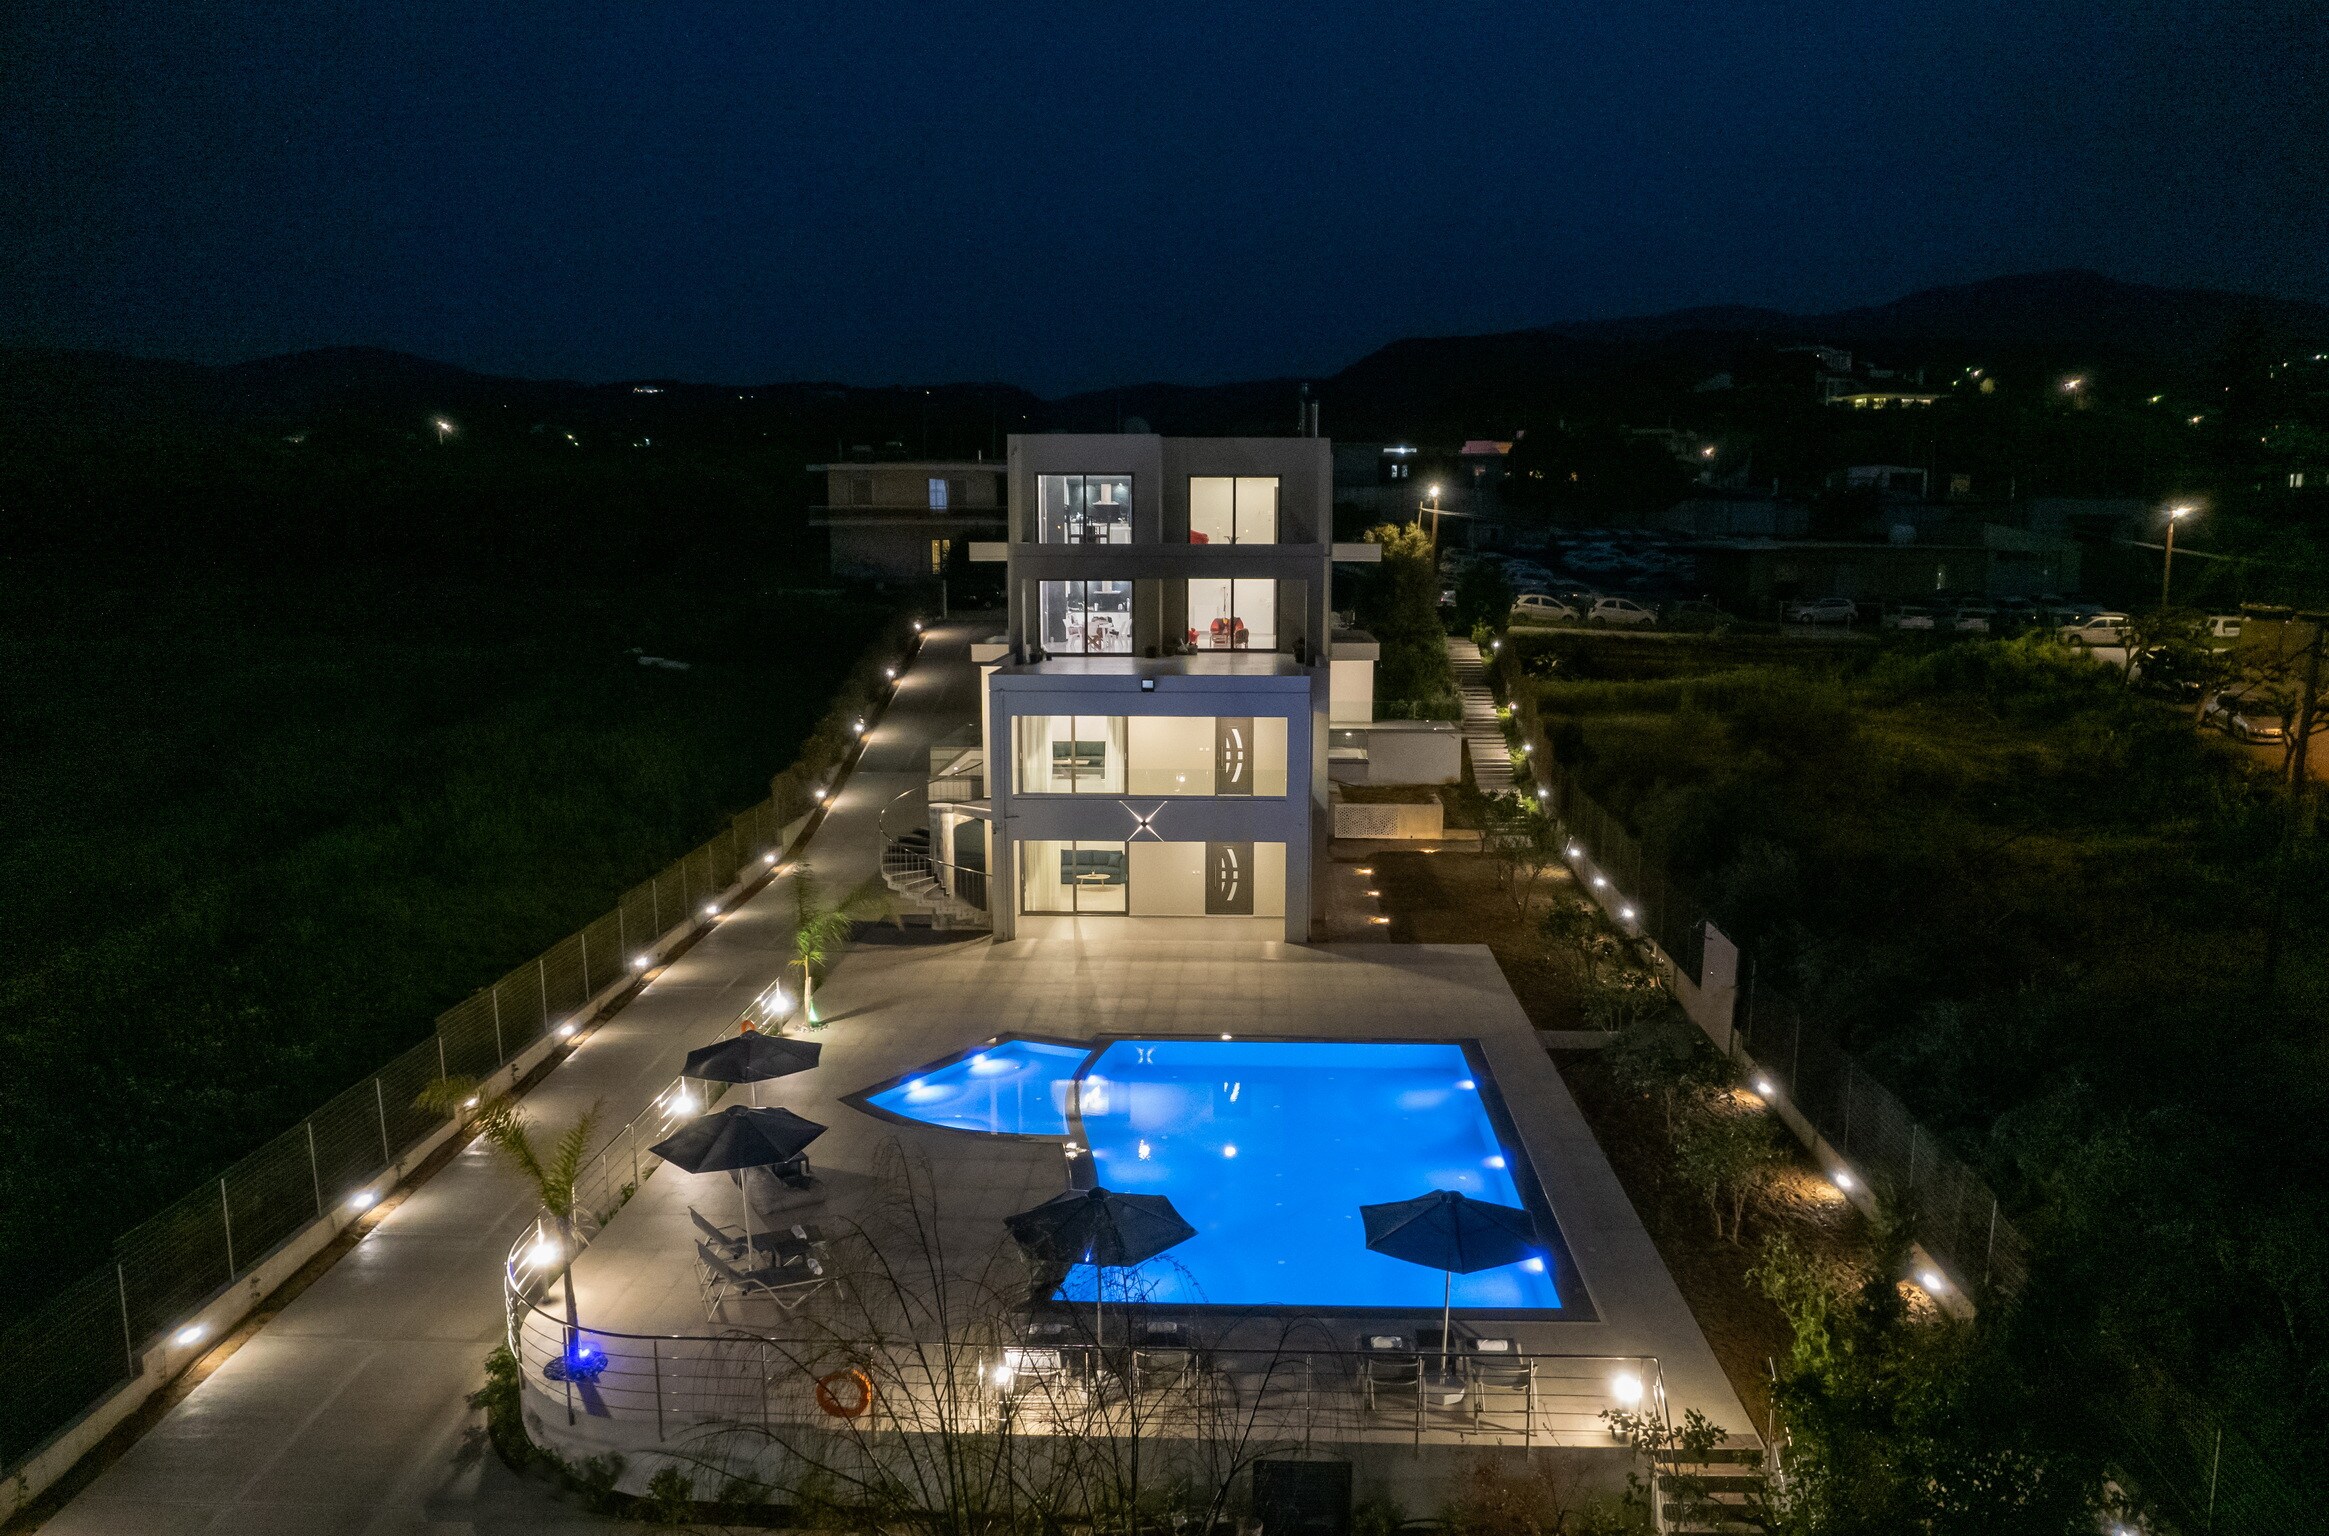 Exterior view & private Swimming pool of Modern 3 apts Villa,Huge Swimming pool,Near all amenities,Rethymno,Crete,Greece